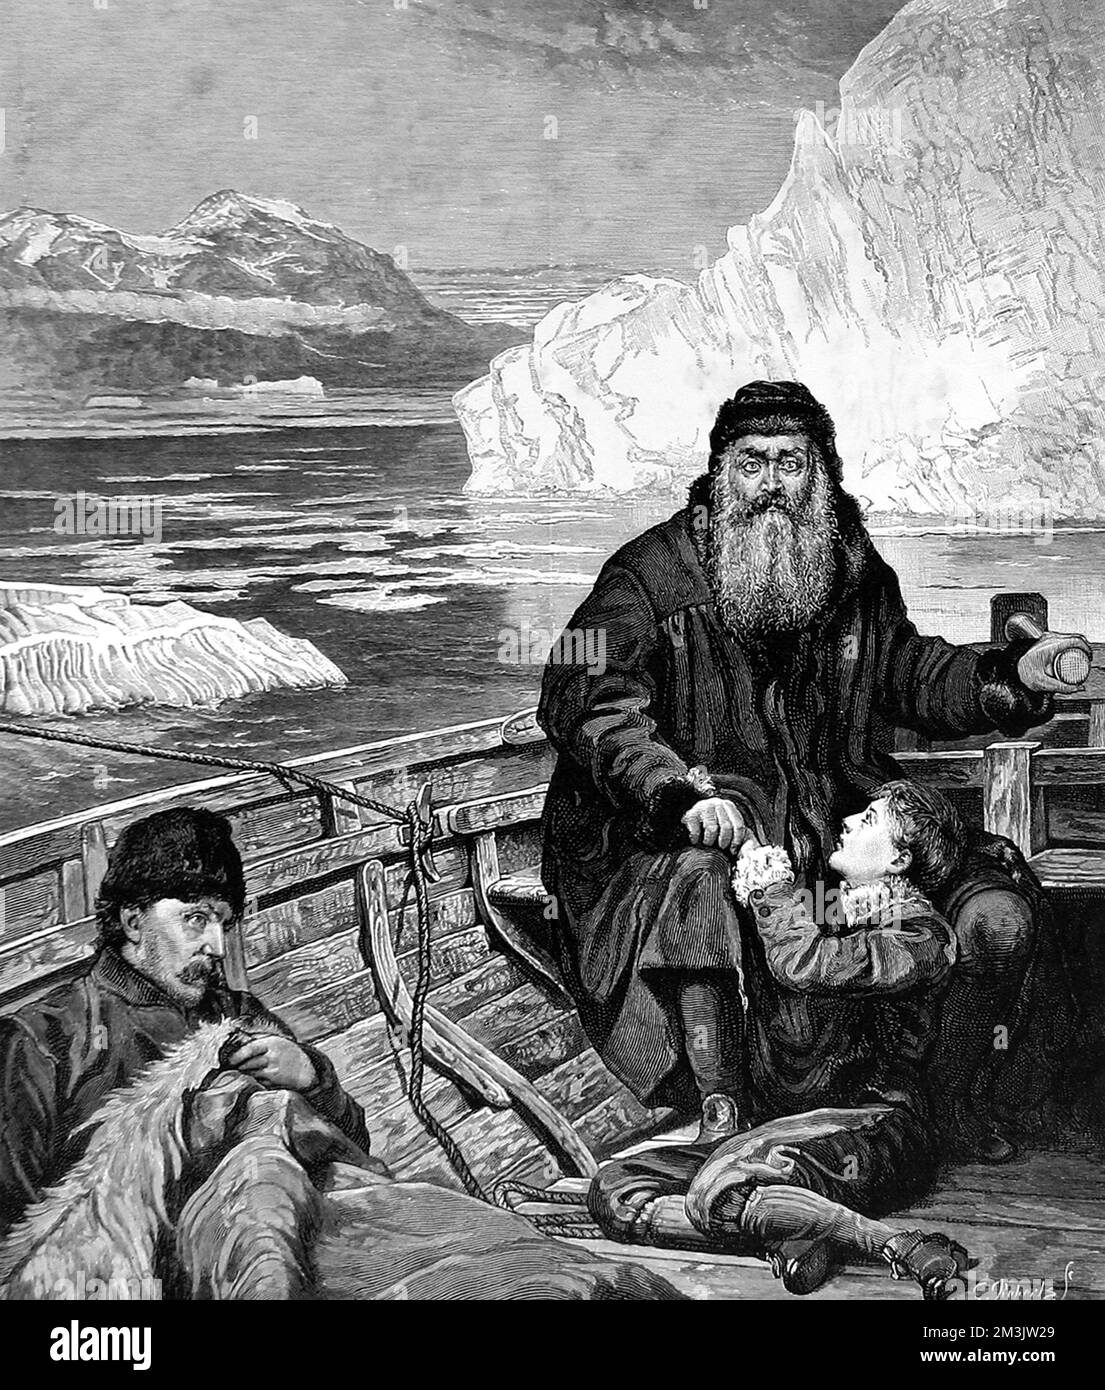 'The Last Voyage of Henry Hudson', a painting by John Collier, exhibited at the Royal Academy, 1882. Henry Hudson, the great navigator, made his last voyage to the Polar Seas in 1610. In the summer of 1611 his crew mutinied and set him adrift in an open boat with his son, John Hudson, and some of the most ill members of the crew. They were never seen again. Stock Photo